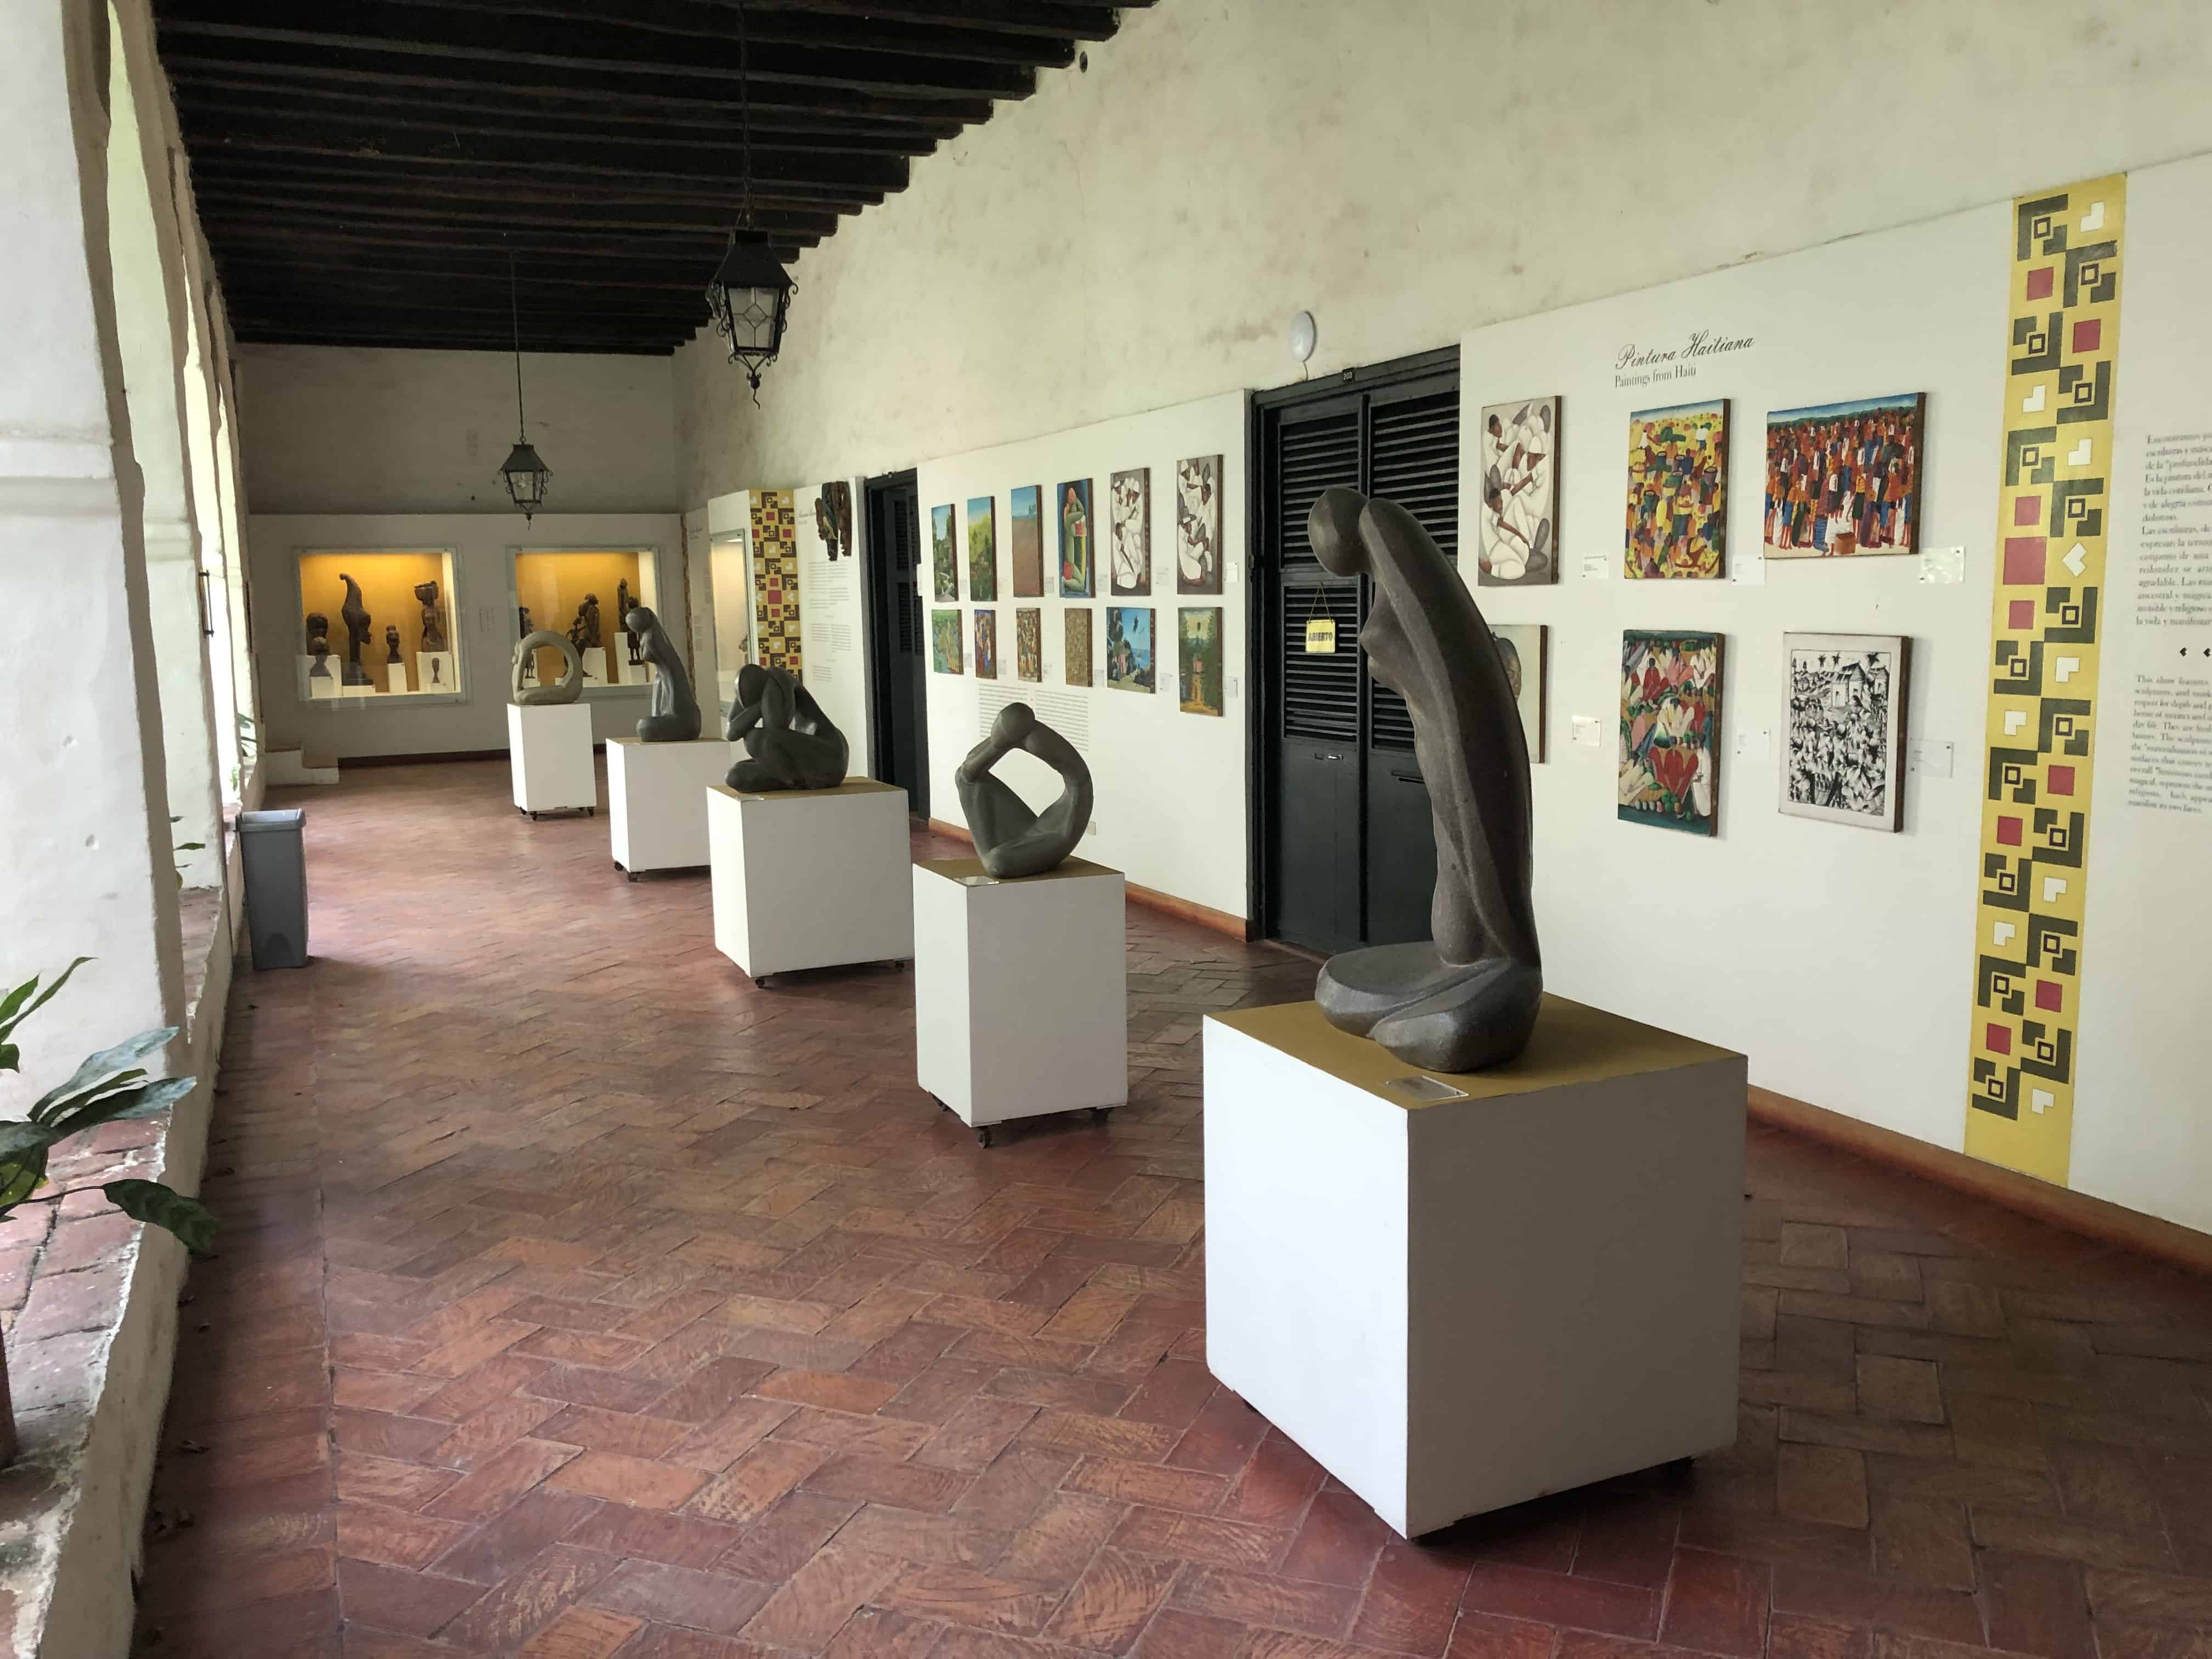 Gallery of Afro-Caribbean art at the Sanctuary of San Pedro Claver Museum in Cartagena, Colombia